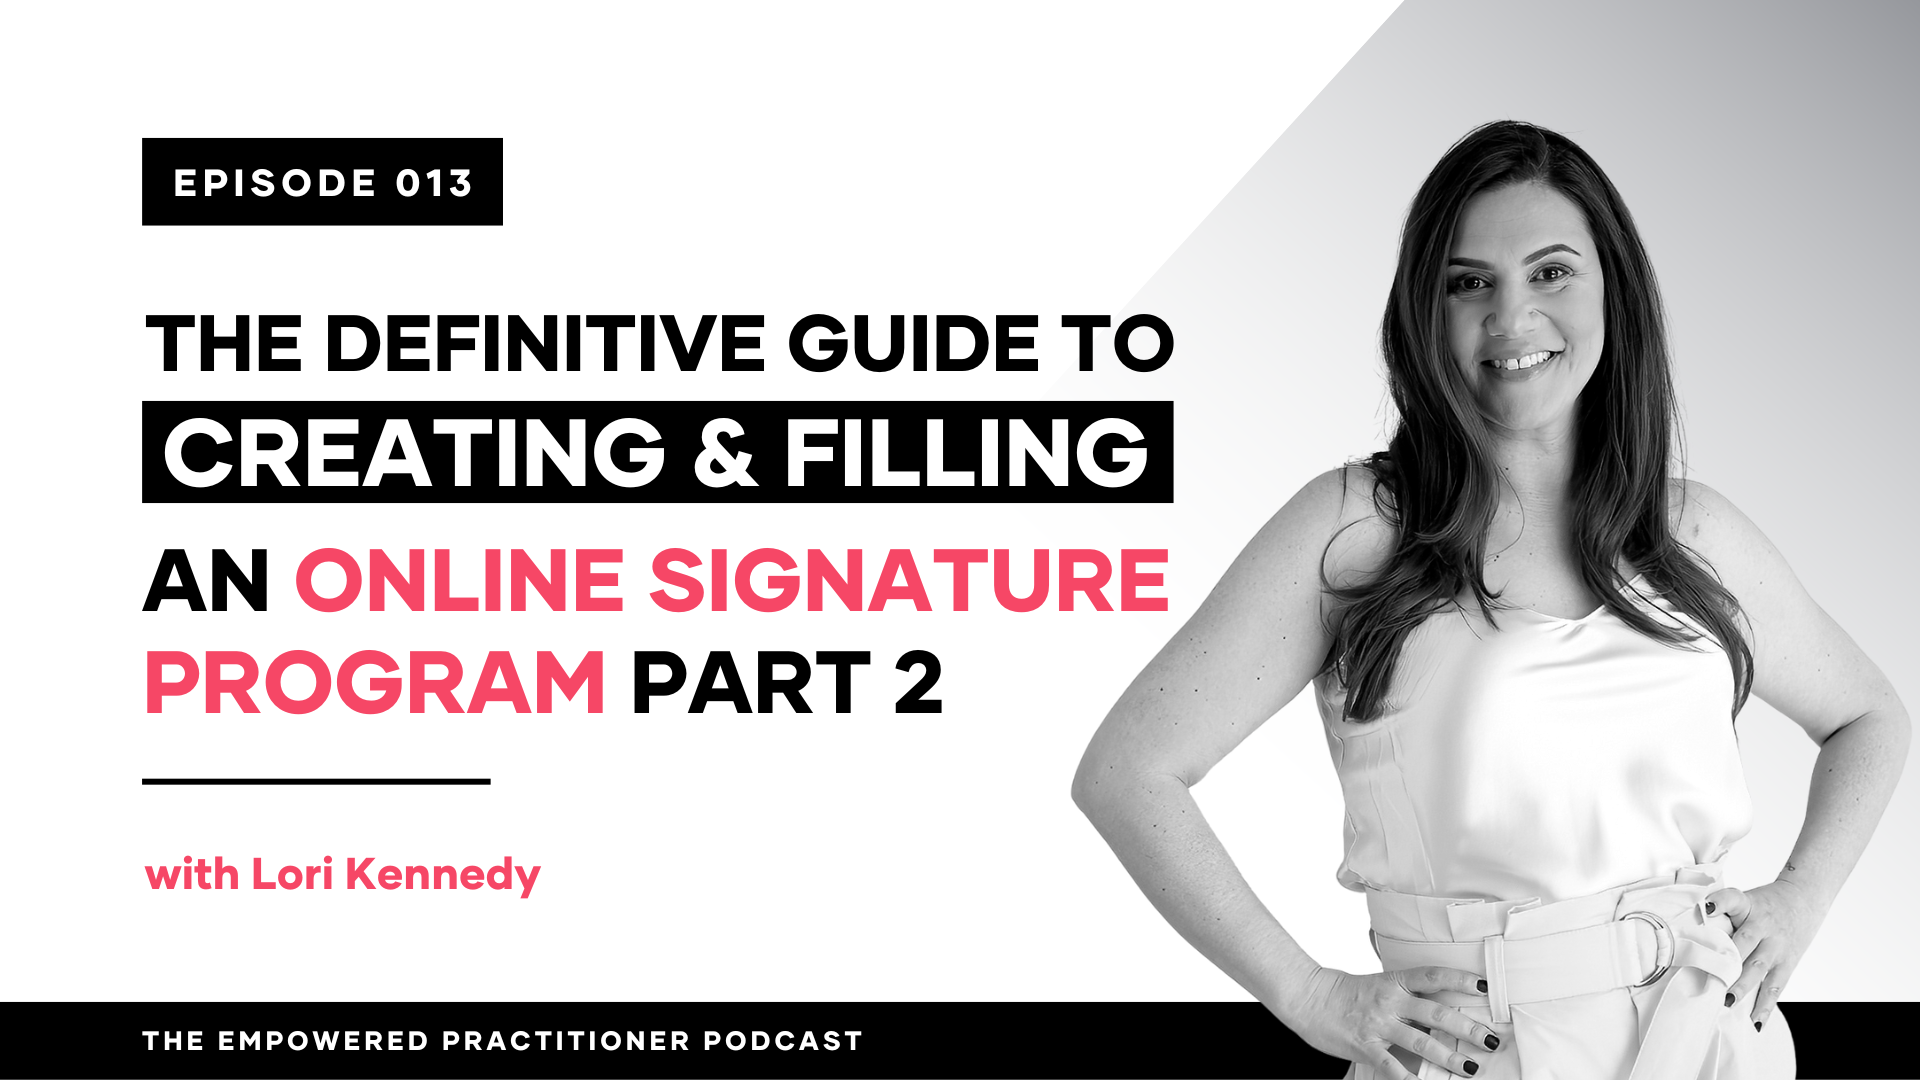 The Definitive Guide To Creating & Filling An Online Signature Program Part 2